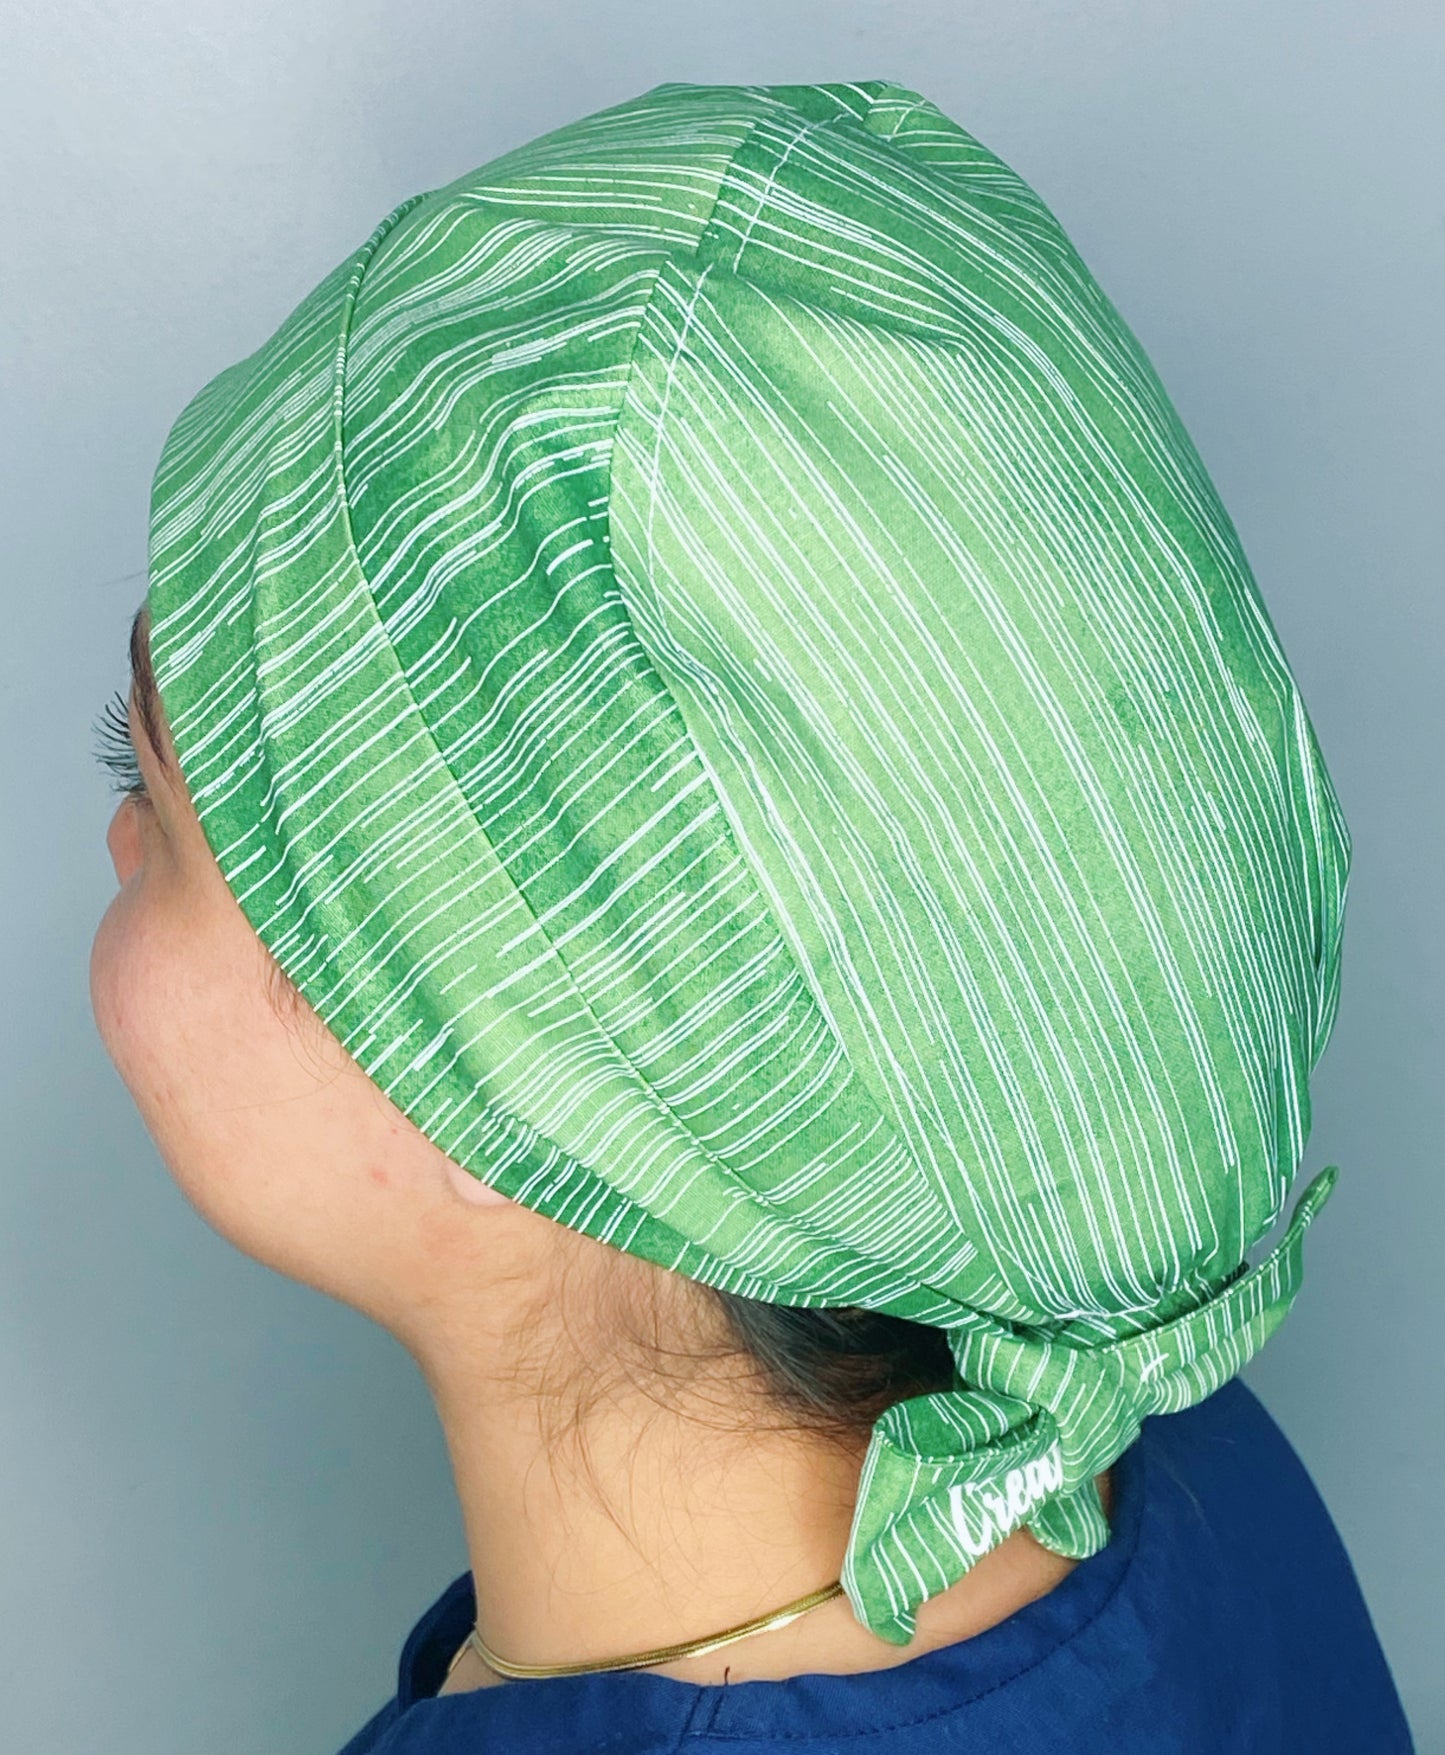 White Thin Stripes on Green Pattern Fancy Themed Pixie